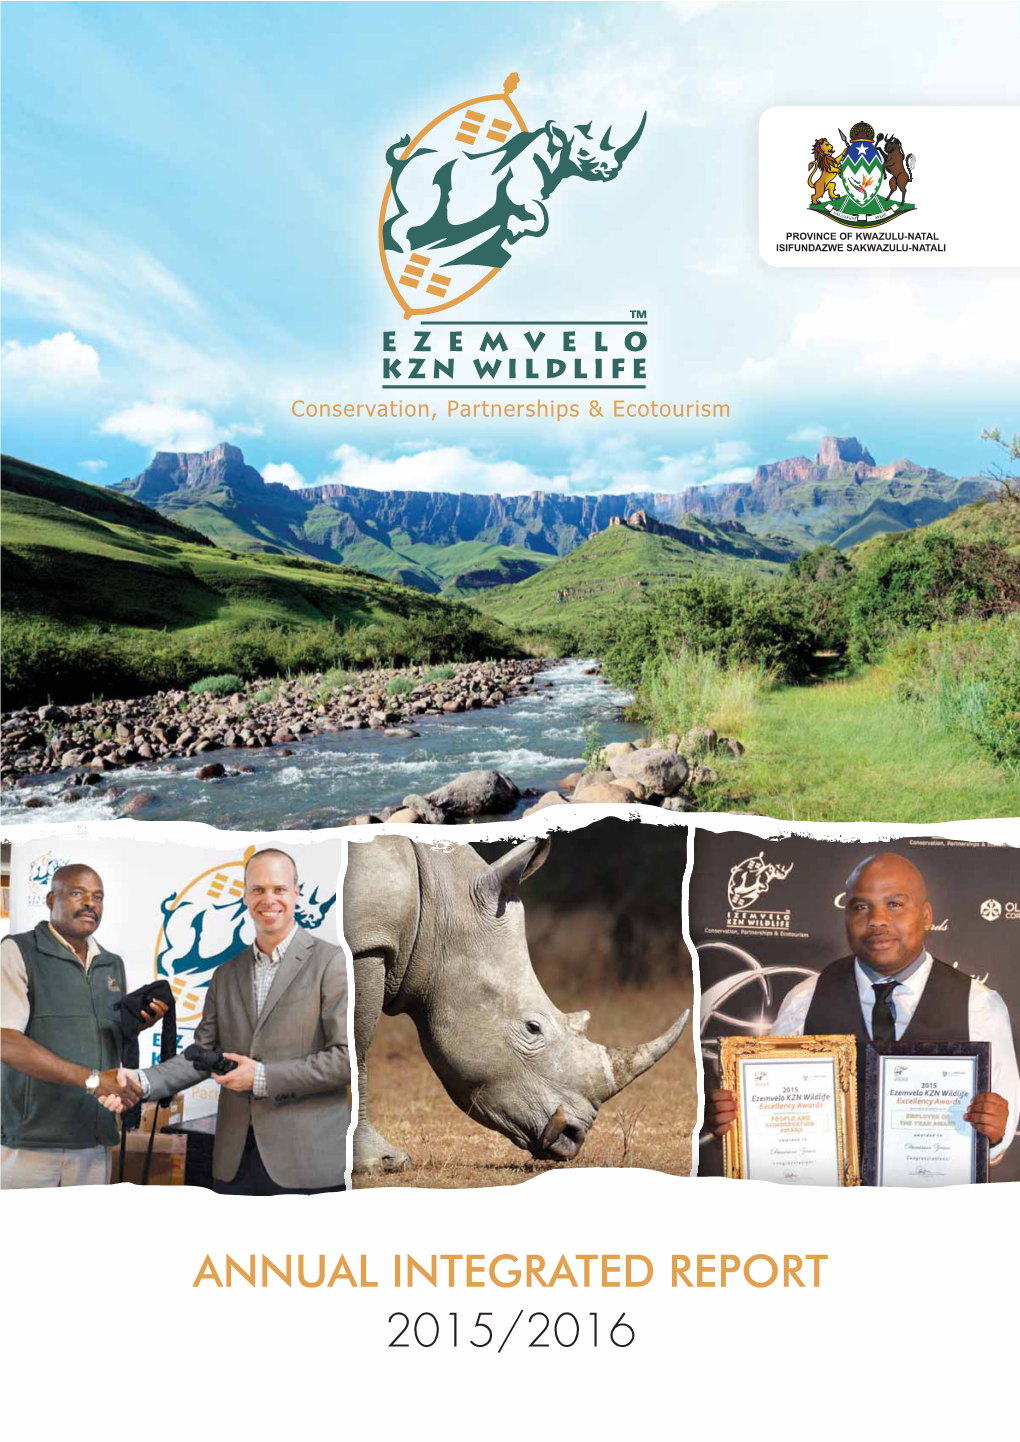 Annual Report for the Kwazulu-Natal Economic Development, Tourism and Environmental Affairs